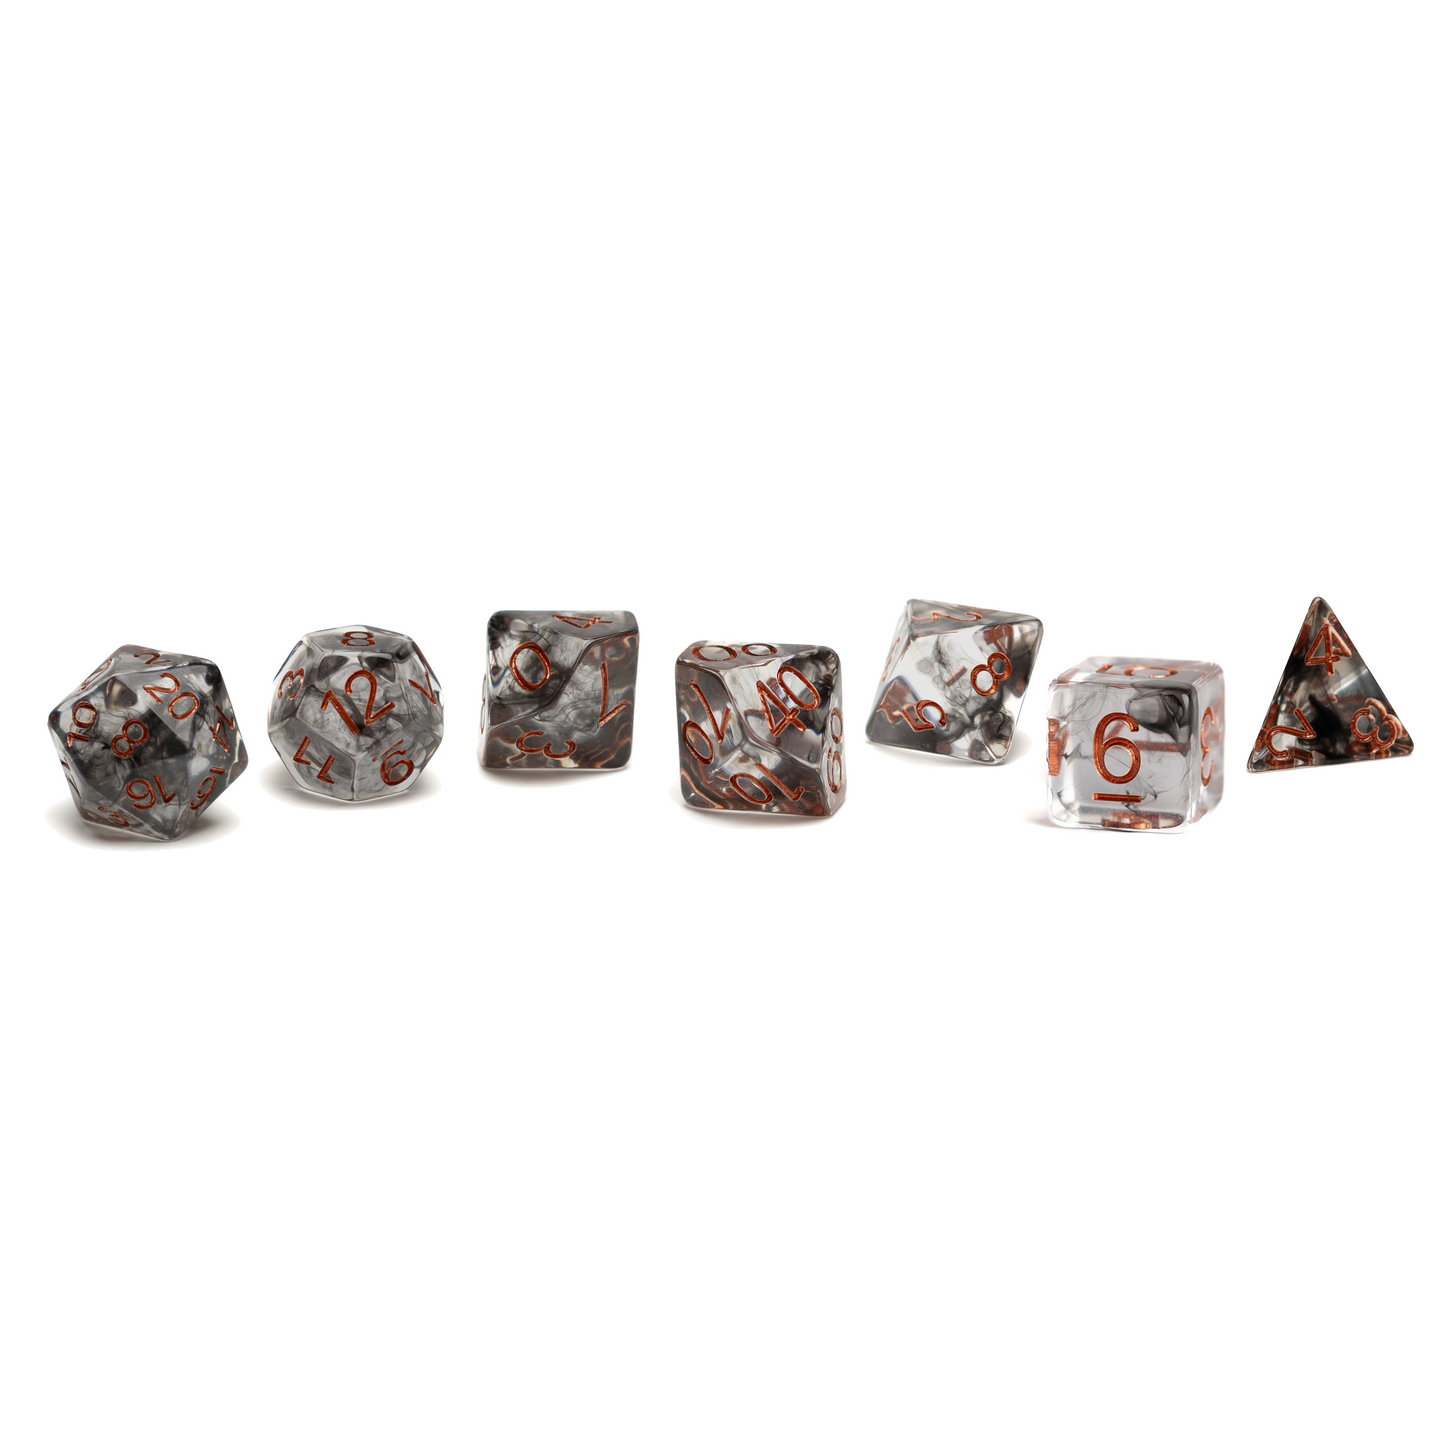 Roll Britannia Jeff Silverbow Dungeons and Dragons Dice Set with Smoke and Fire Aesthetic